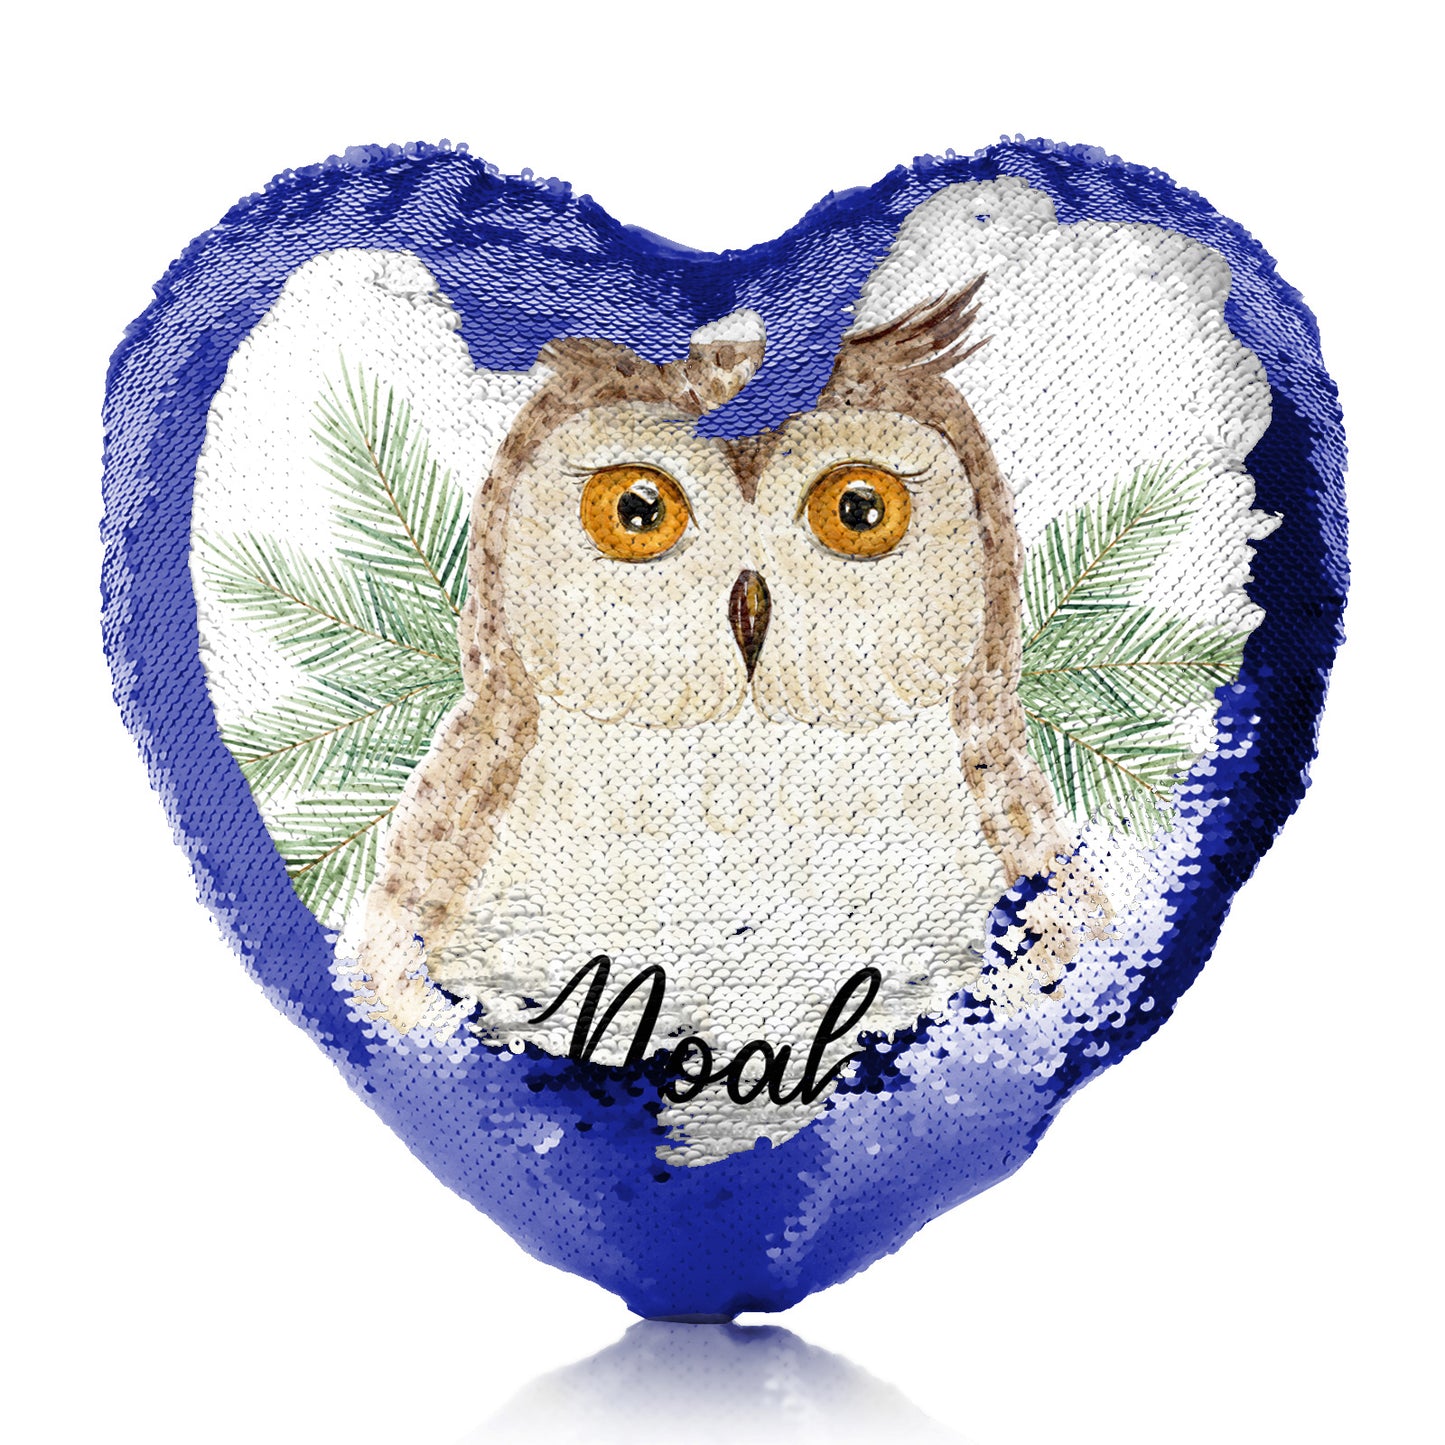 Personalised Sequin Heart Cushion with Brown Owl Pine Tree and Cute Text